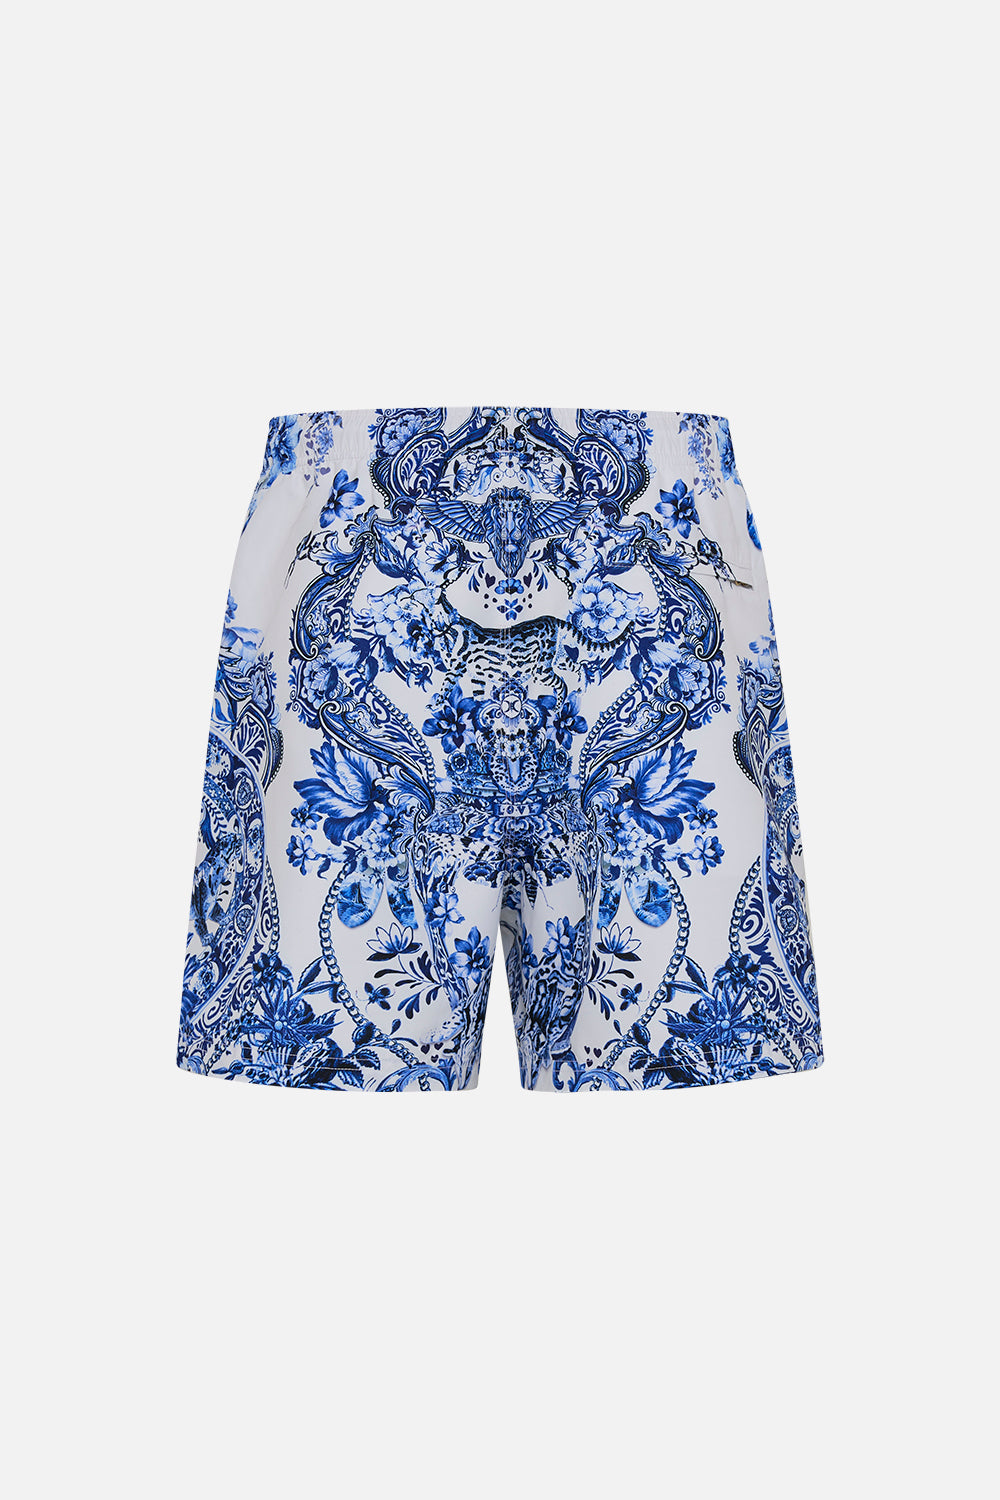 Back view of Hotel Franks By CAMILLA blue and white mens boardshorts in Glaze and Graze print